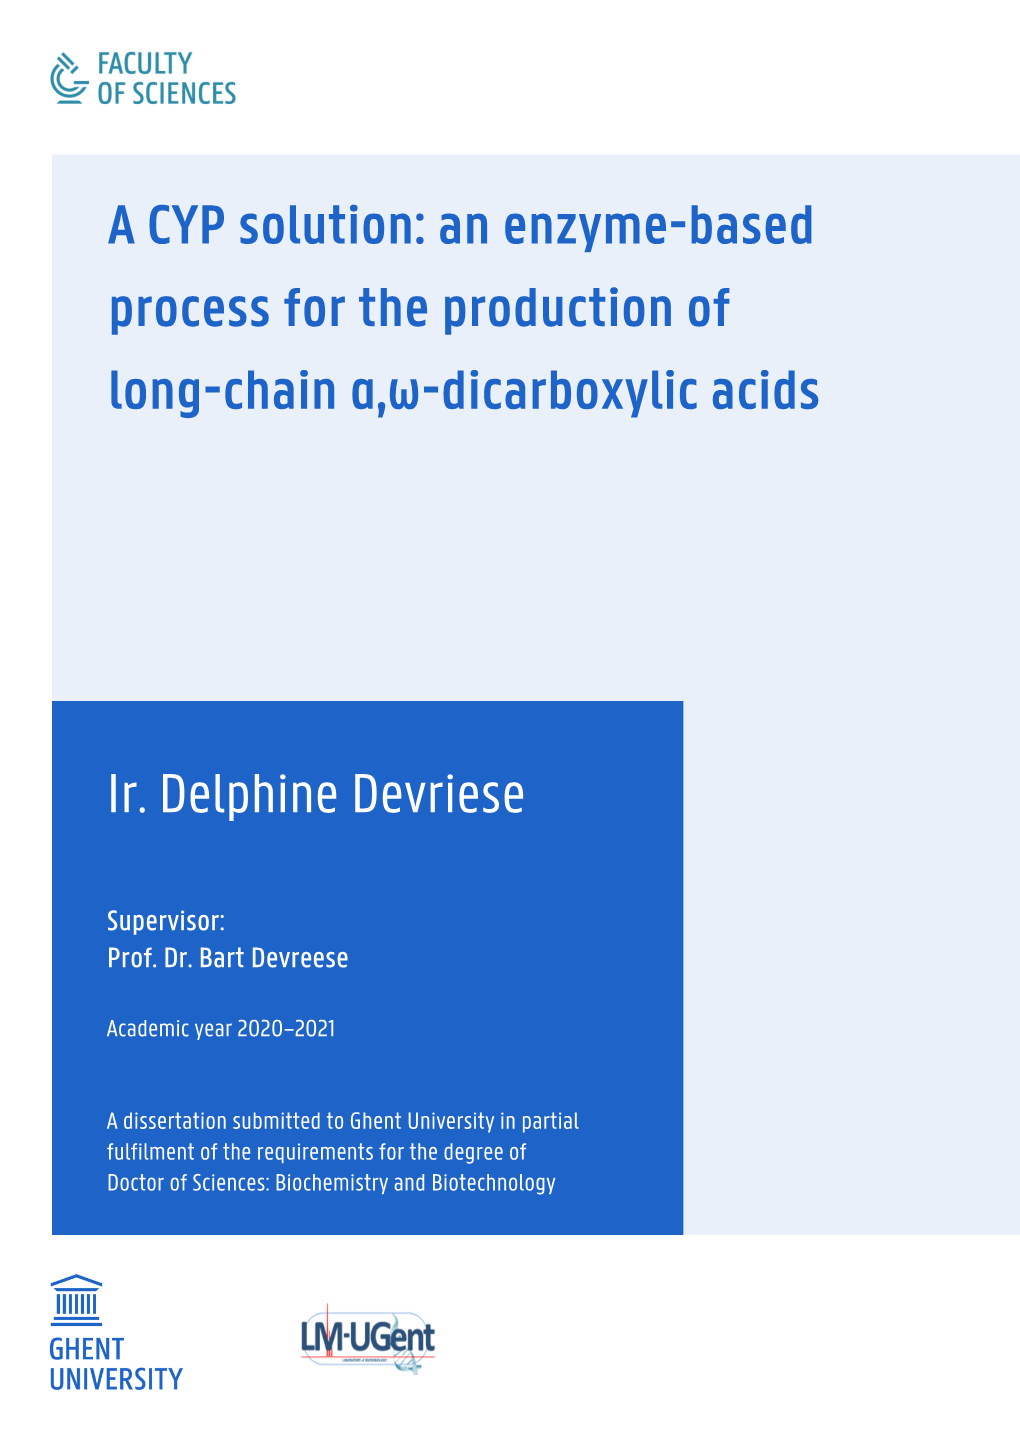 An Enzyme-Based Process for the Production of Long-Chain Α,Ω-Dicarboxylic Acids